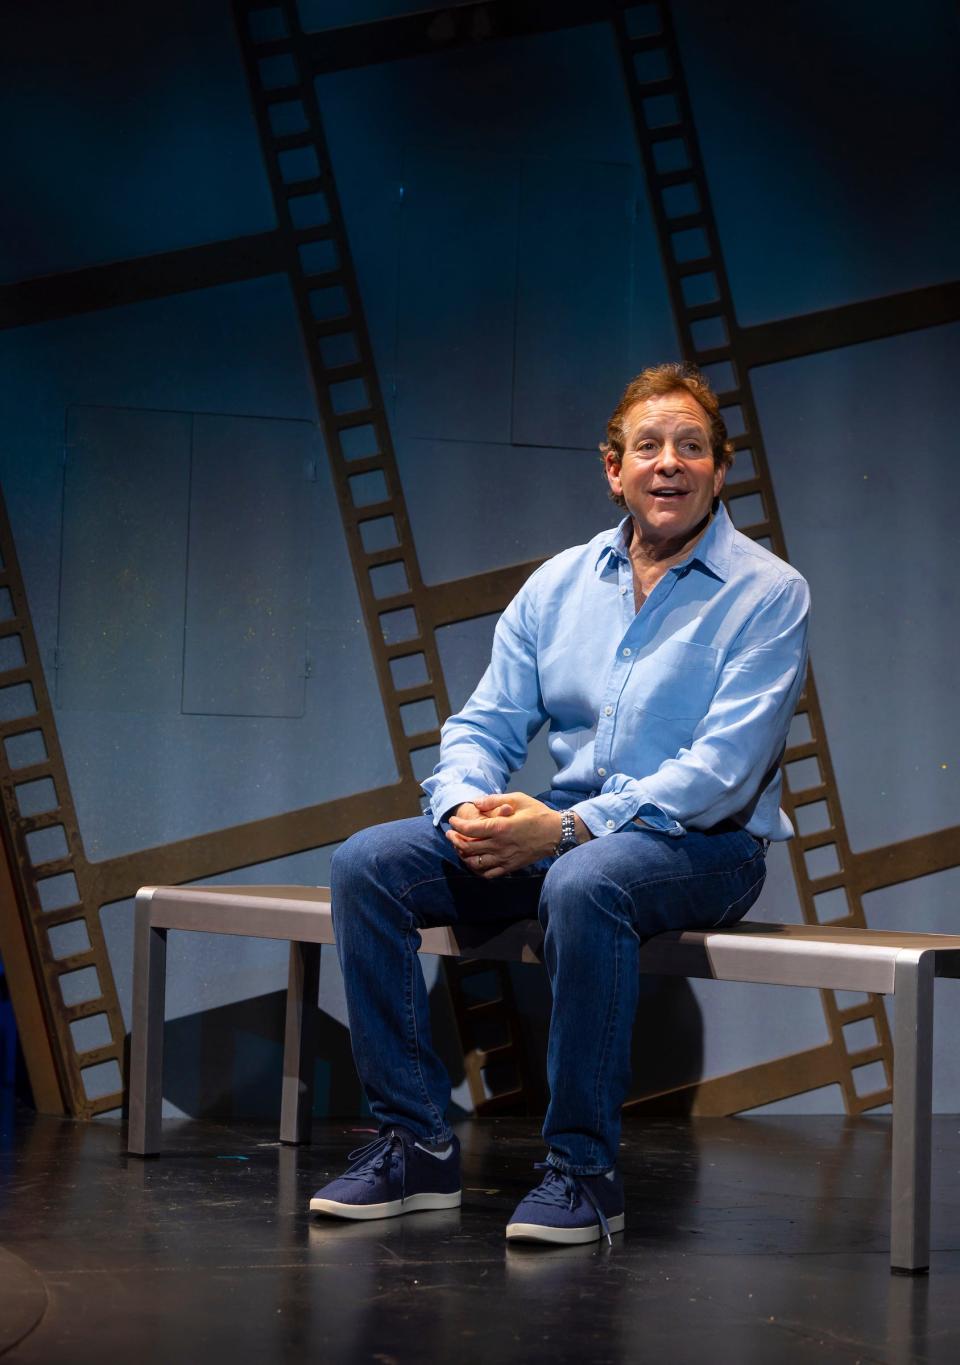 Steve Guttenberg wrote and stars in "Tales From the Guttenberg Bible" at George Street Playhouse.